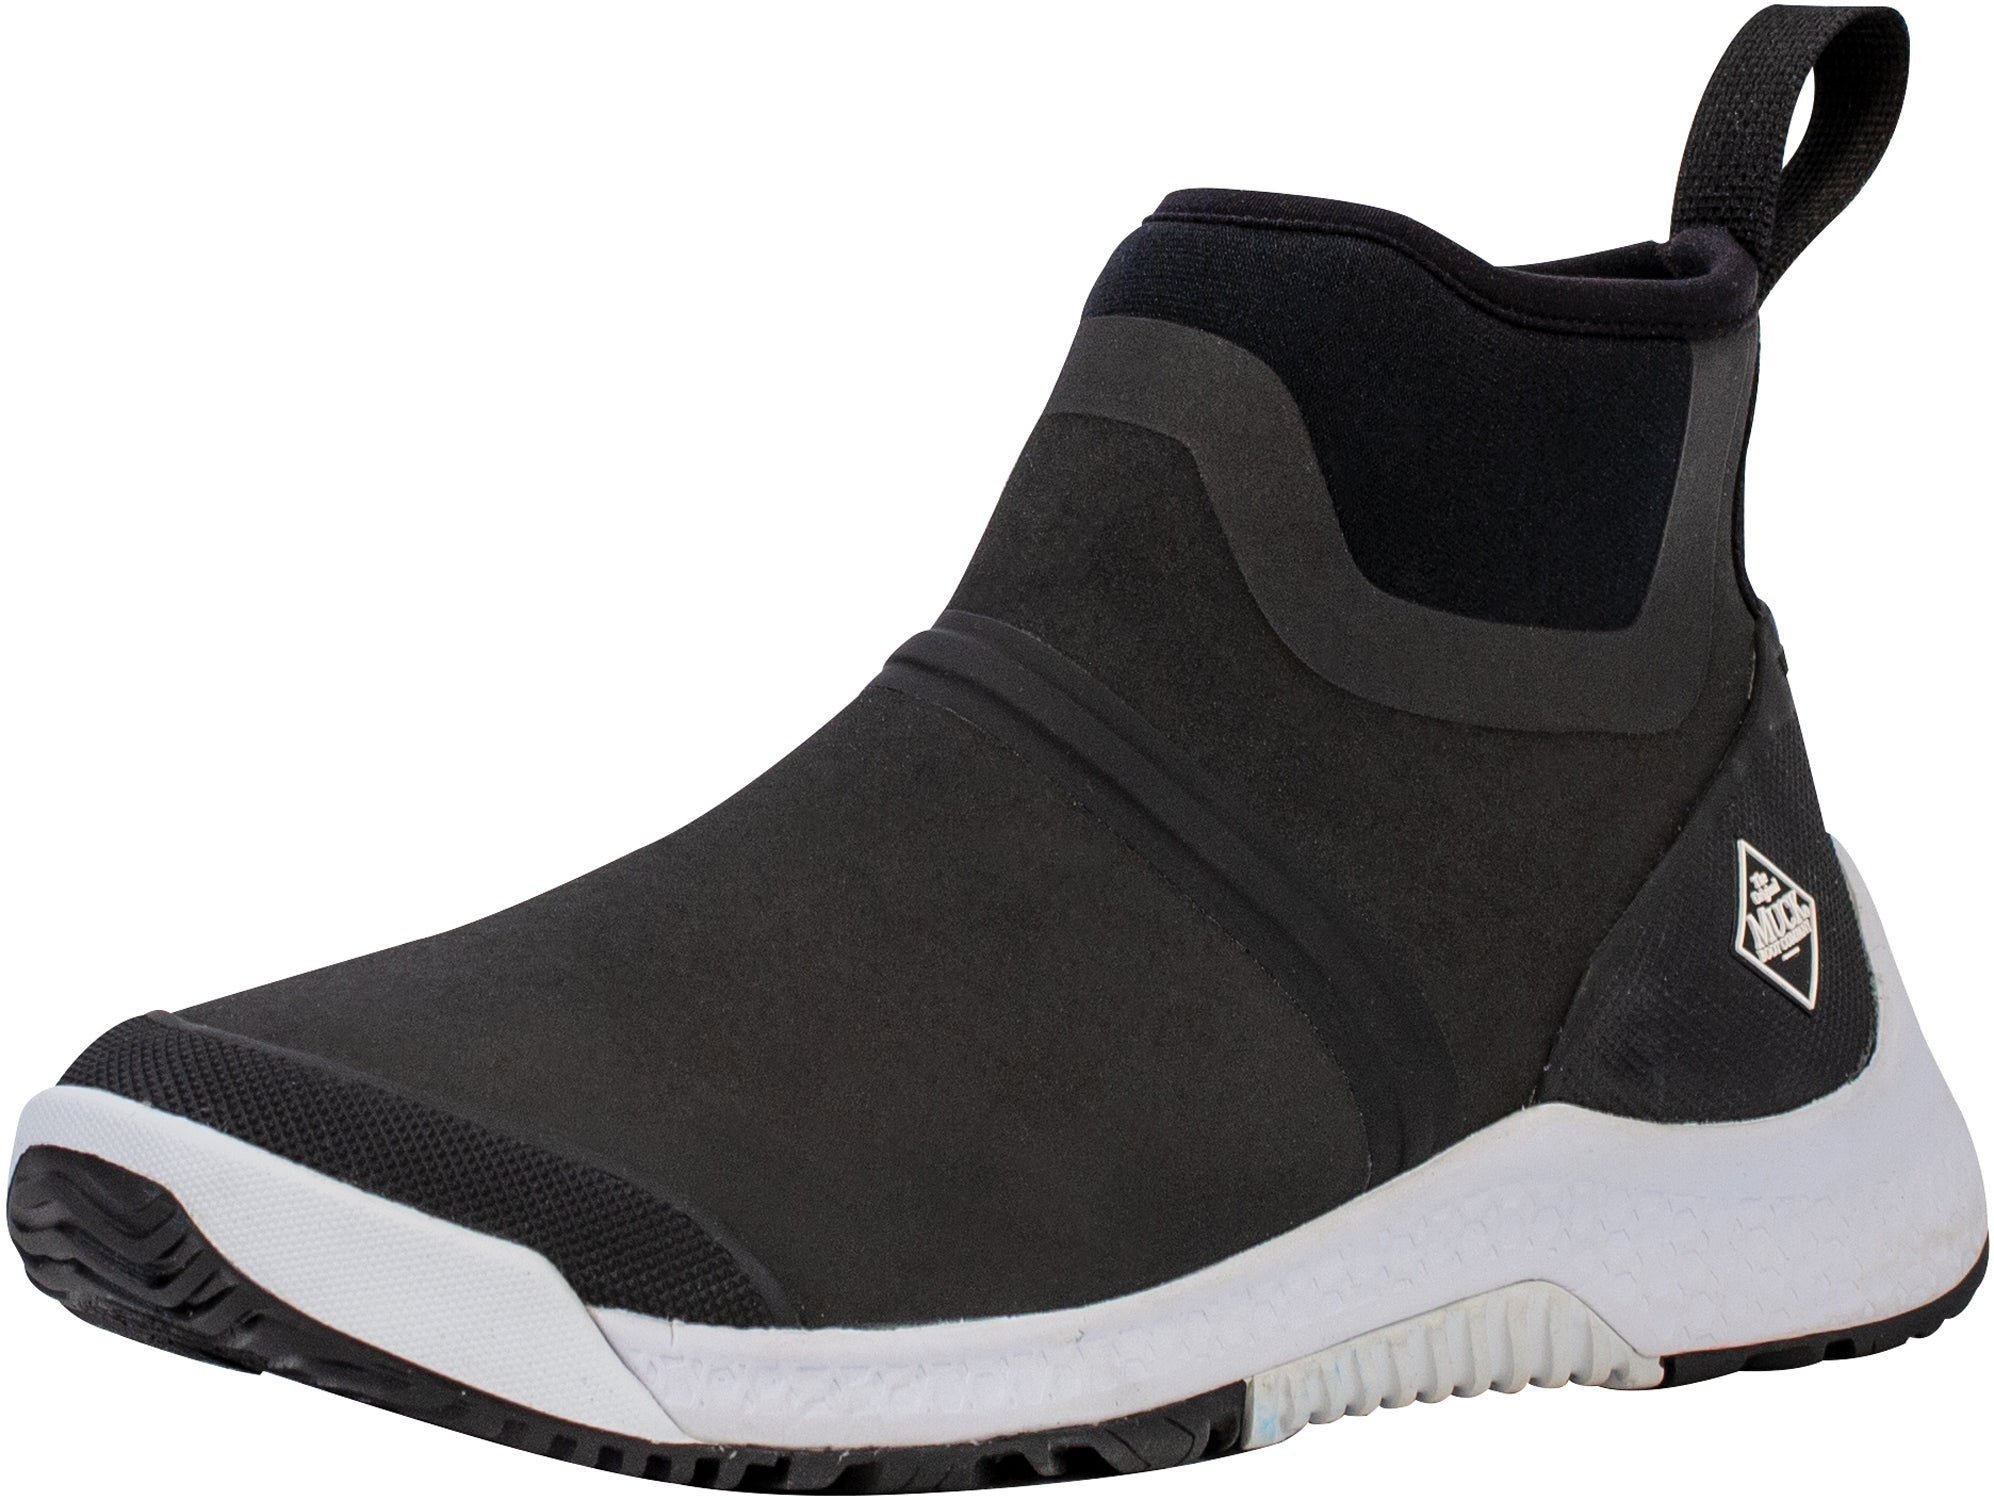 Women's Muck Boot Outscape Chelsea Boot Black from the front